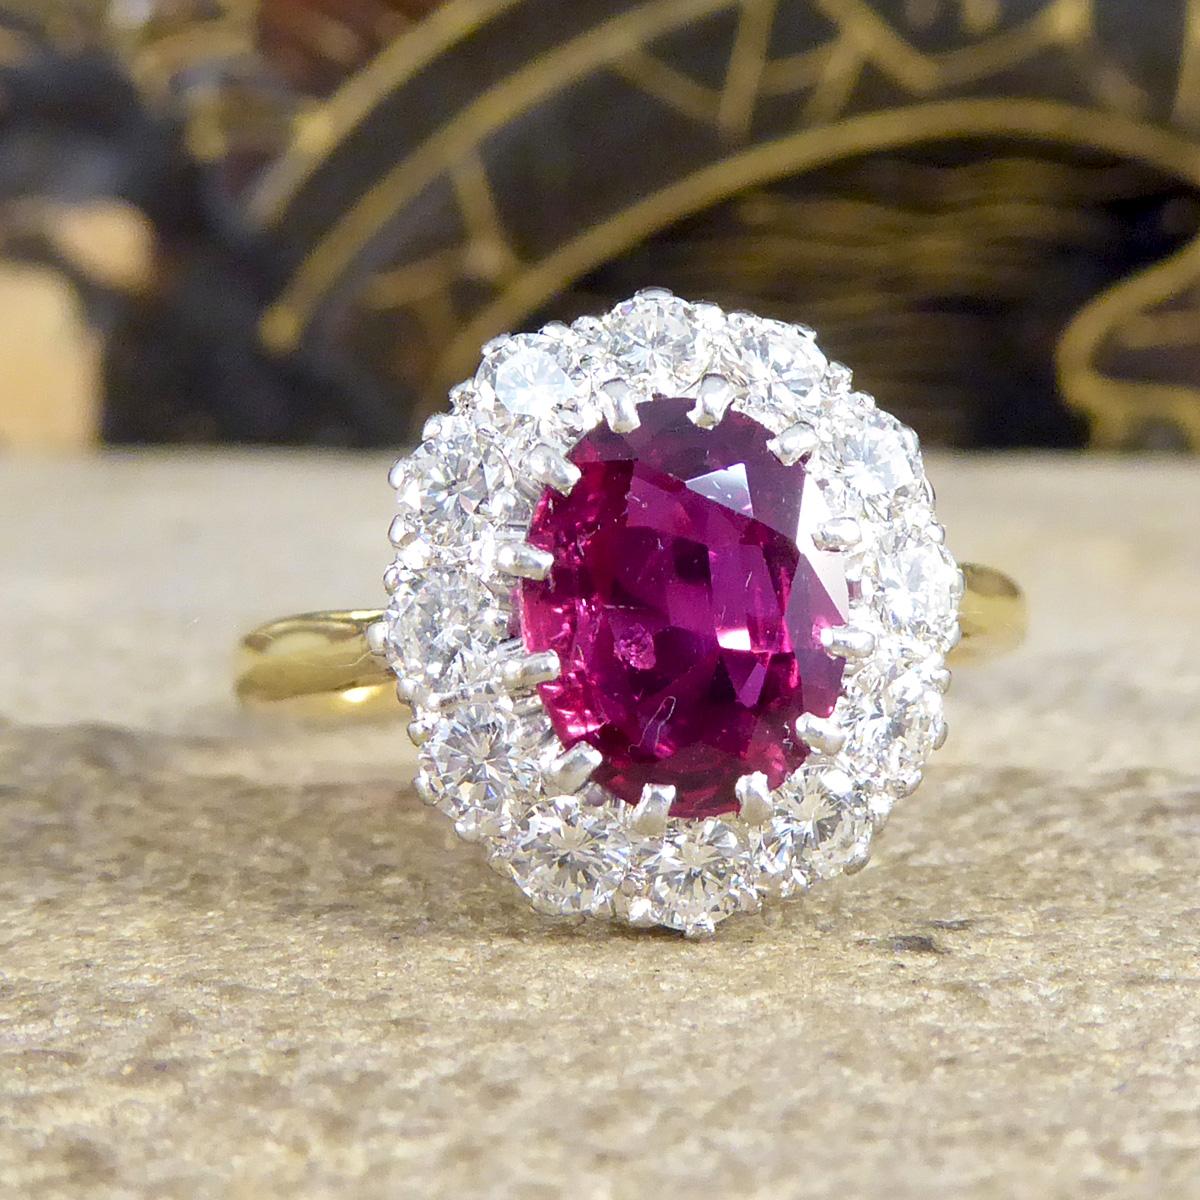 This 1960's Ruby cluster ring is in great condition especially for its age. It has been crafted with a stunningly bright and beautiful Ruby in the centre with a surround of 12 Brilliant Cut Diamonds weighing a total of 0.84ct. The Ruby itself is an